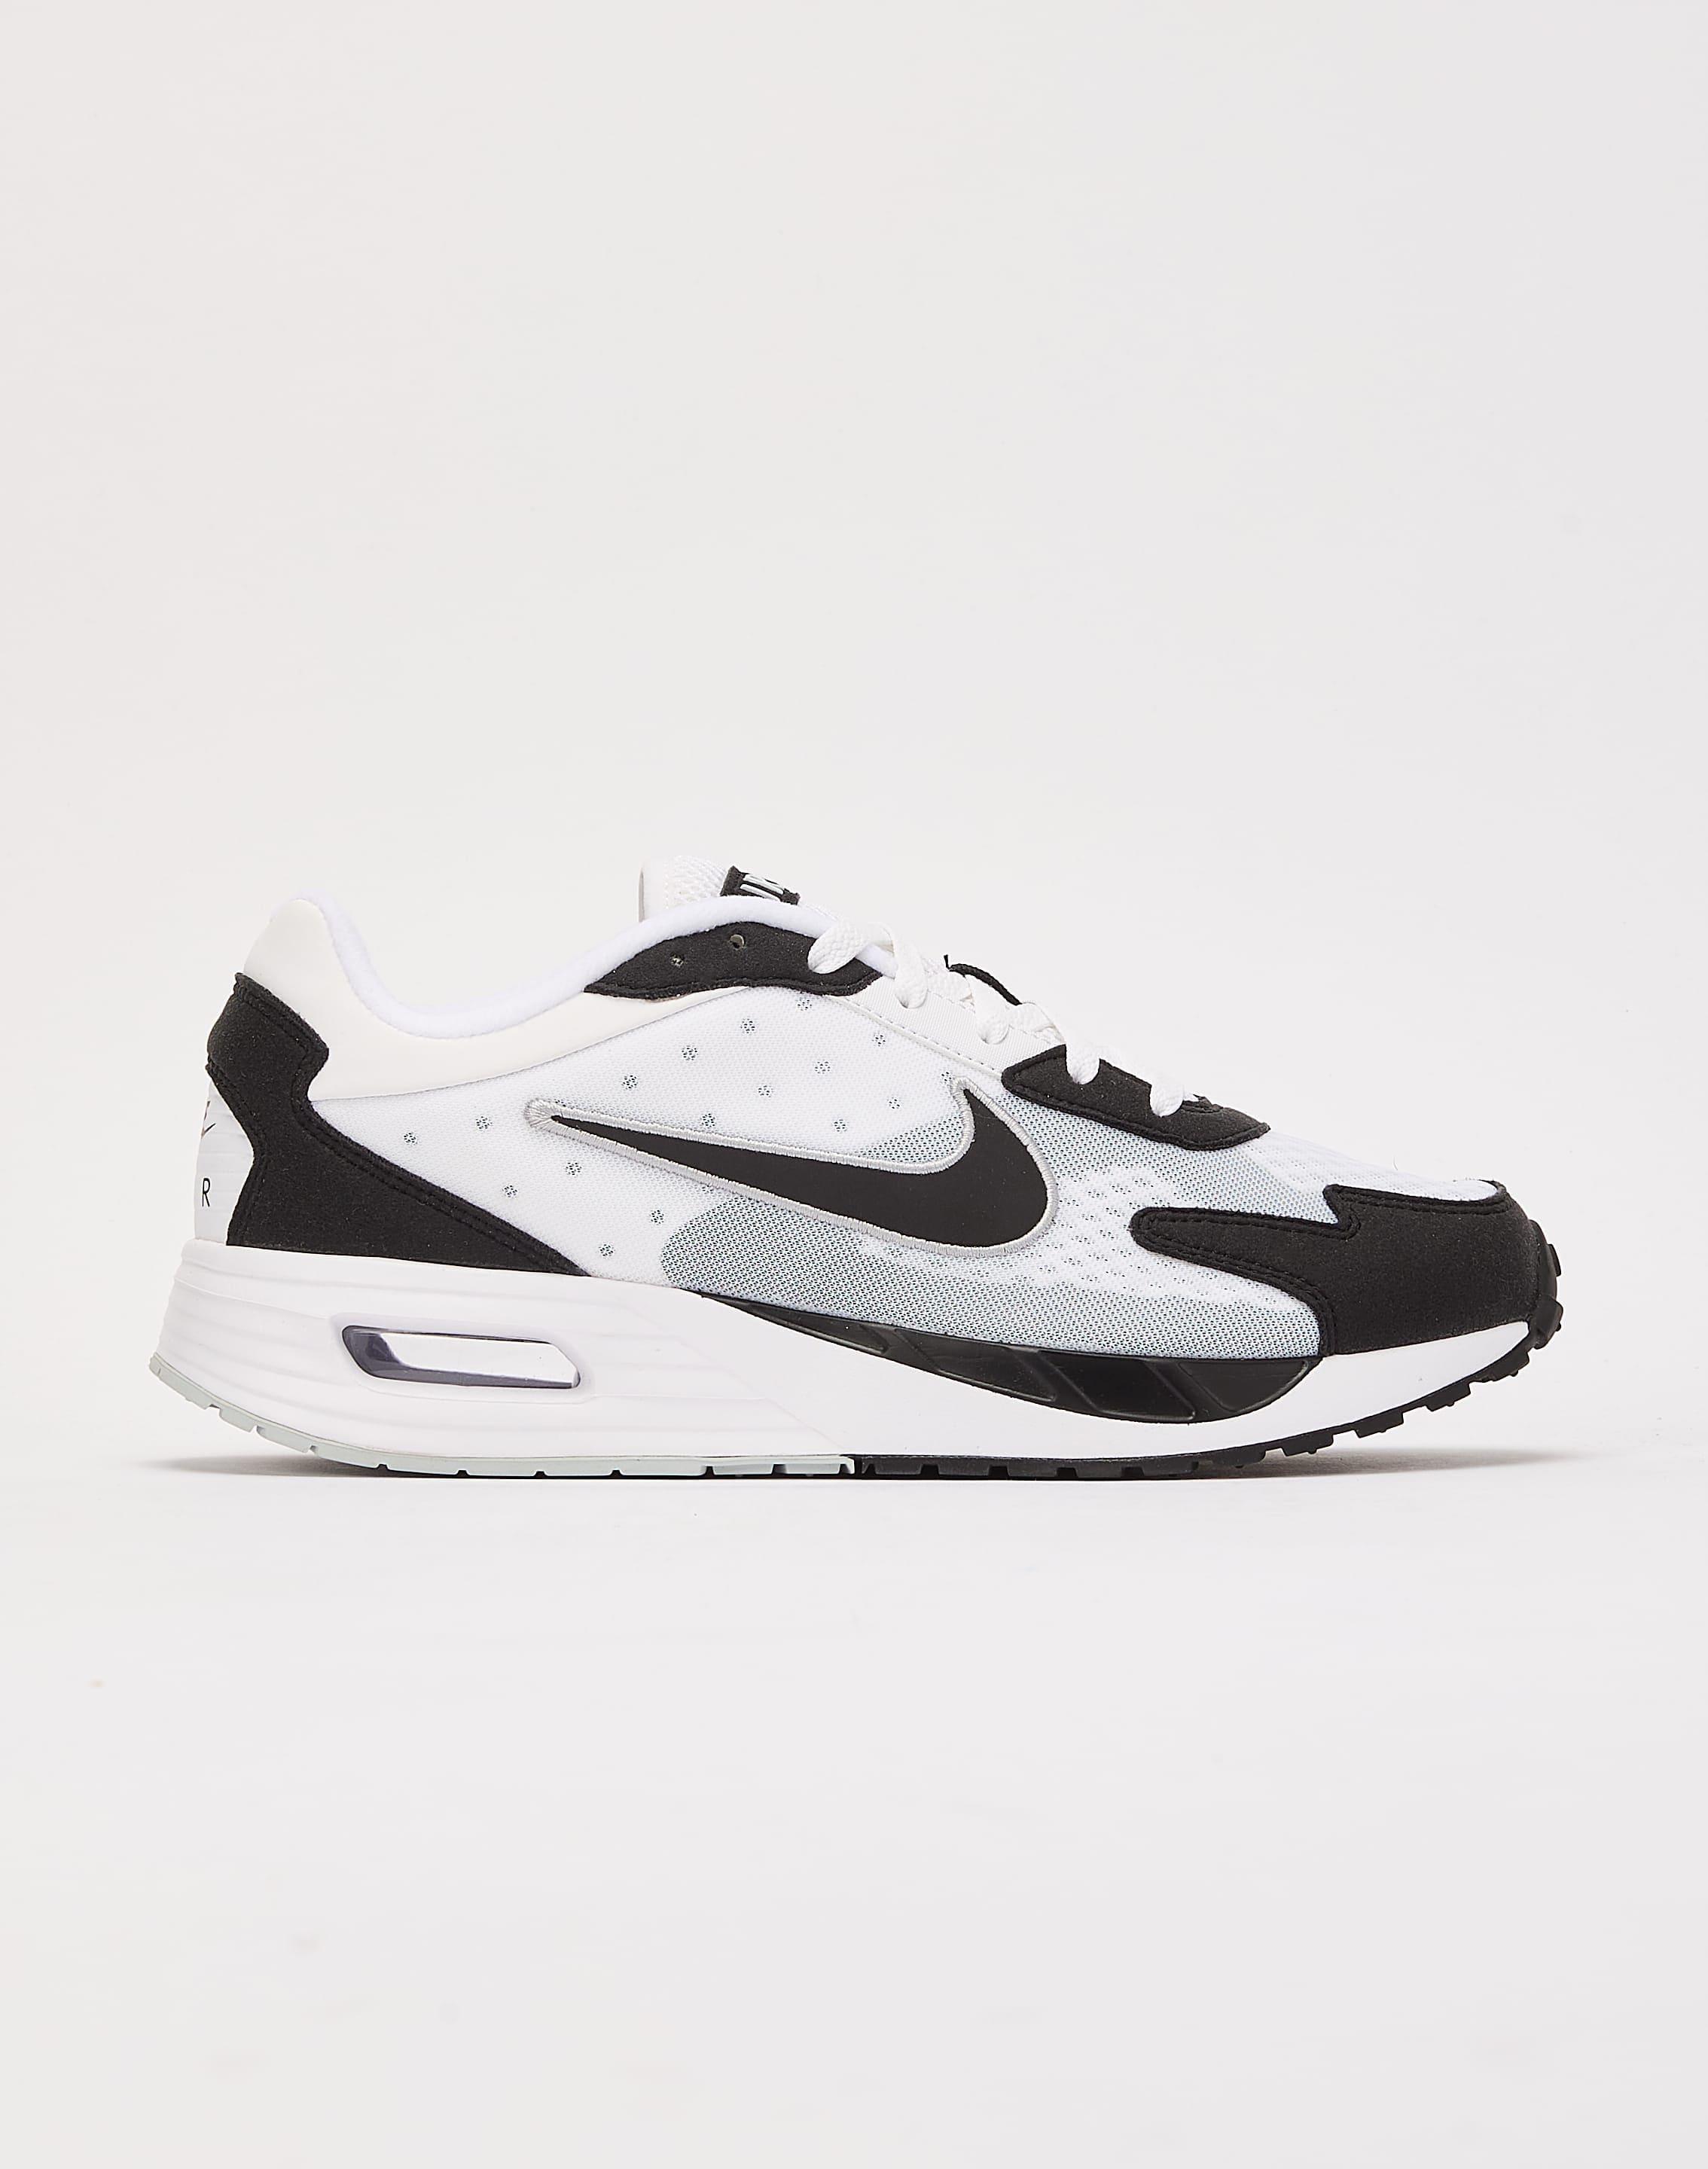 Air Max Solo – DTLR